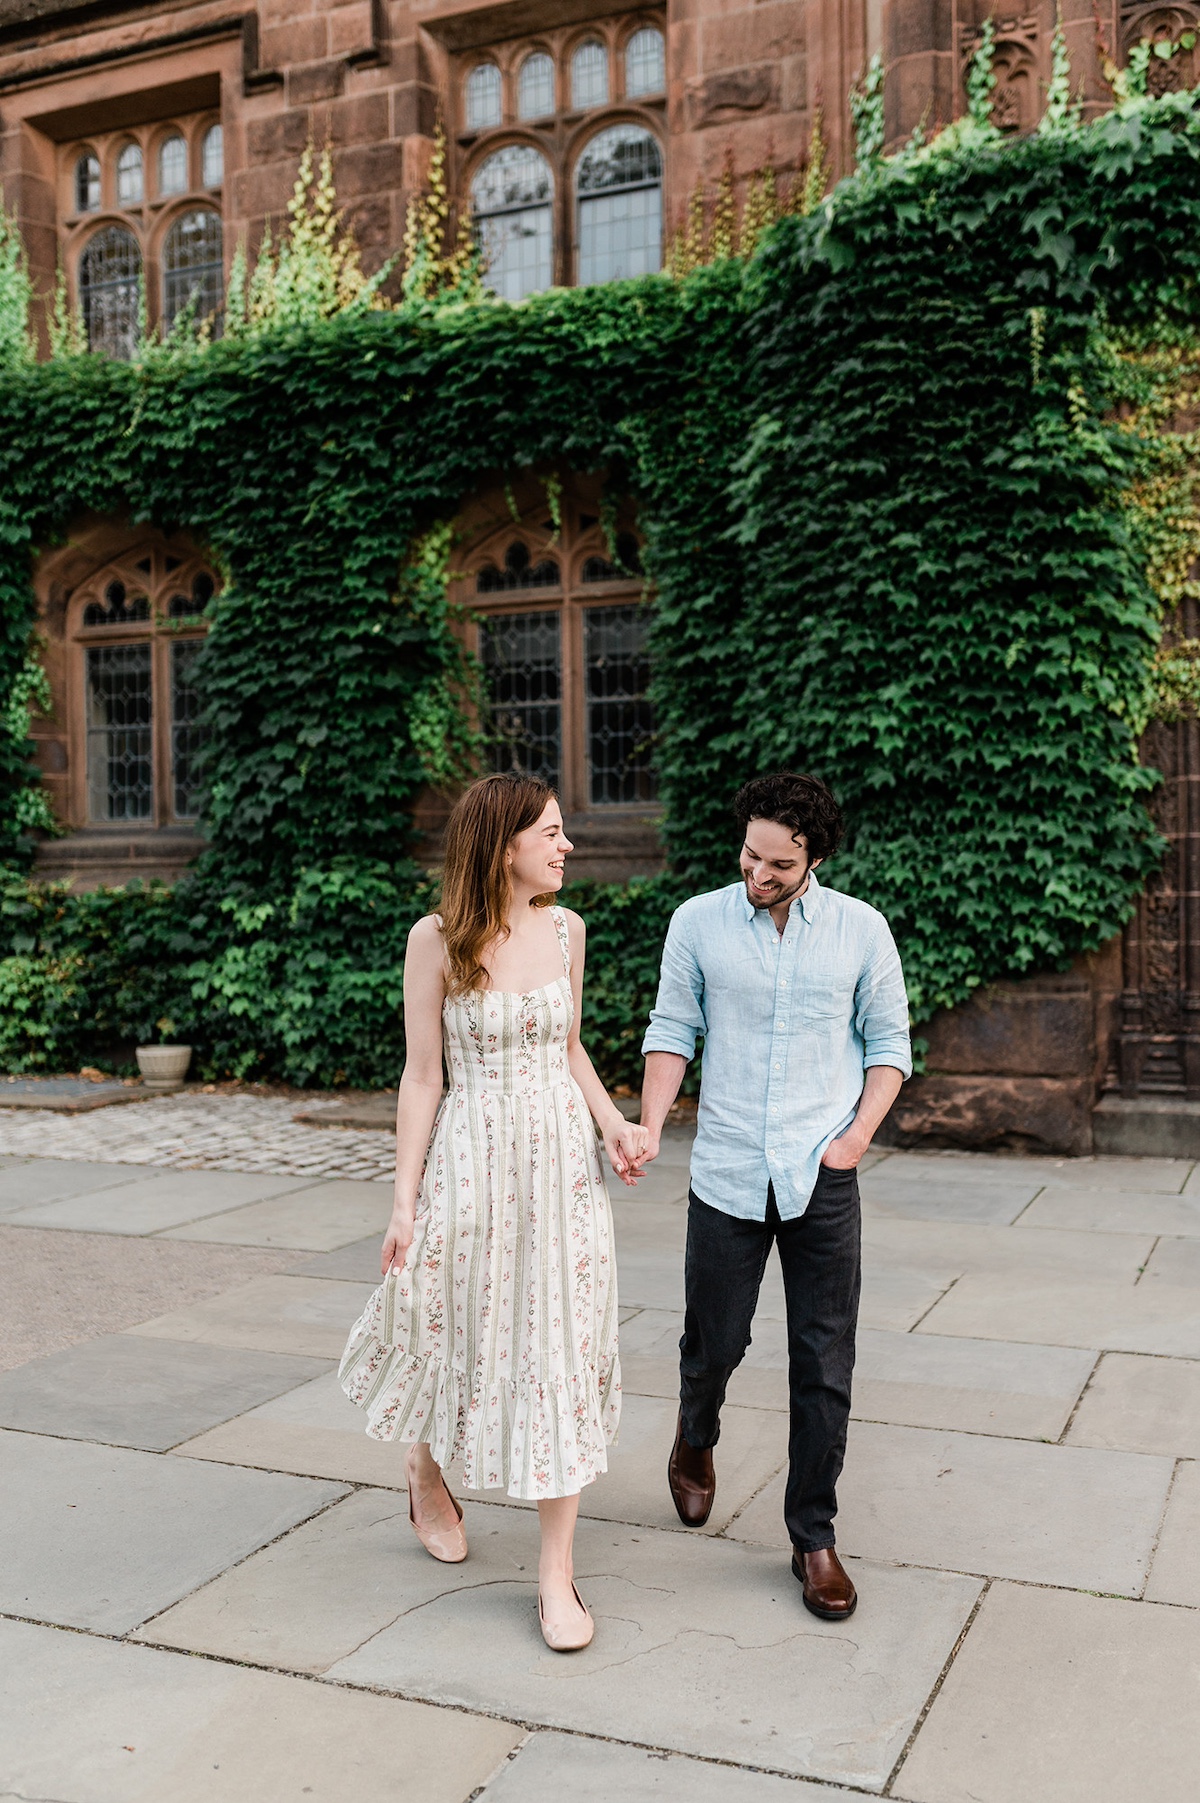 Princeton University's campus, a romantic setting that elevates Page and Christopher's love story.